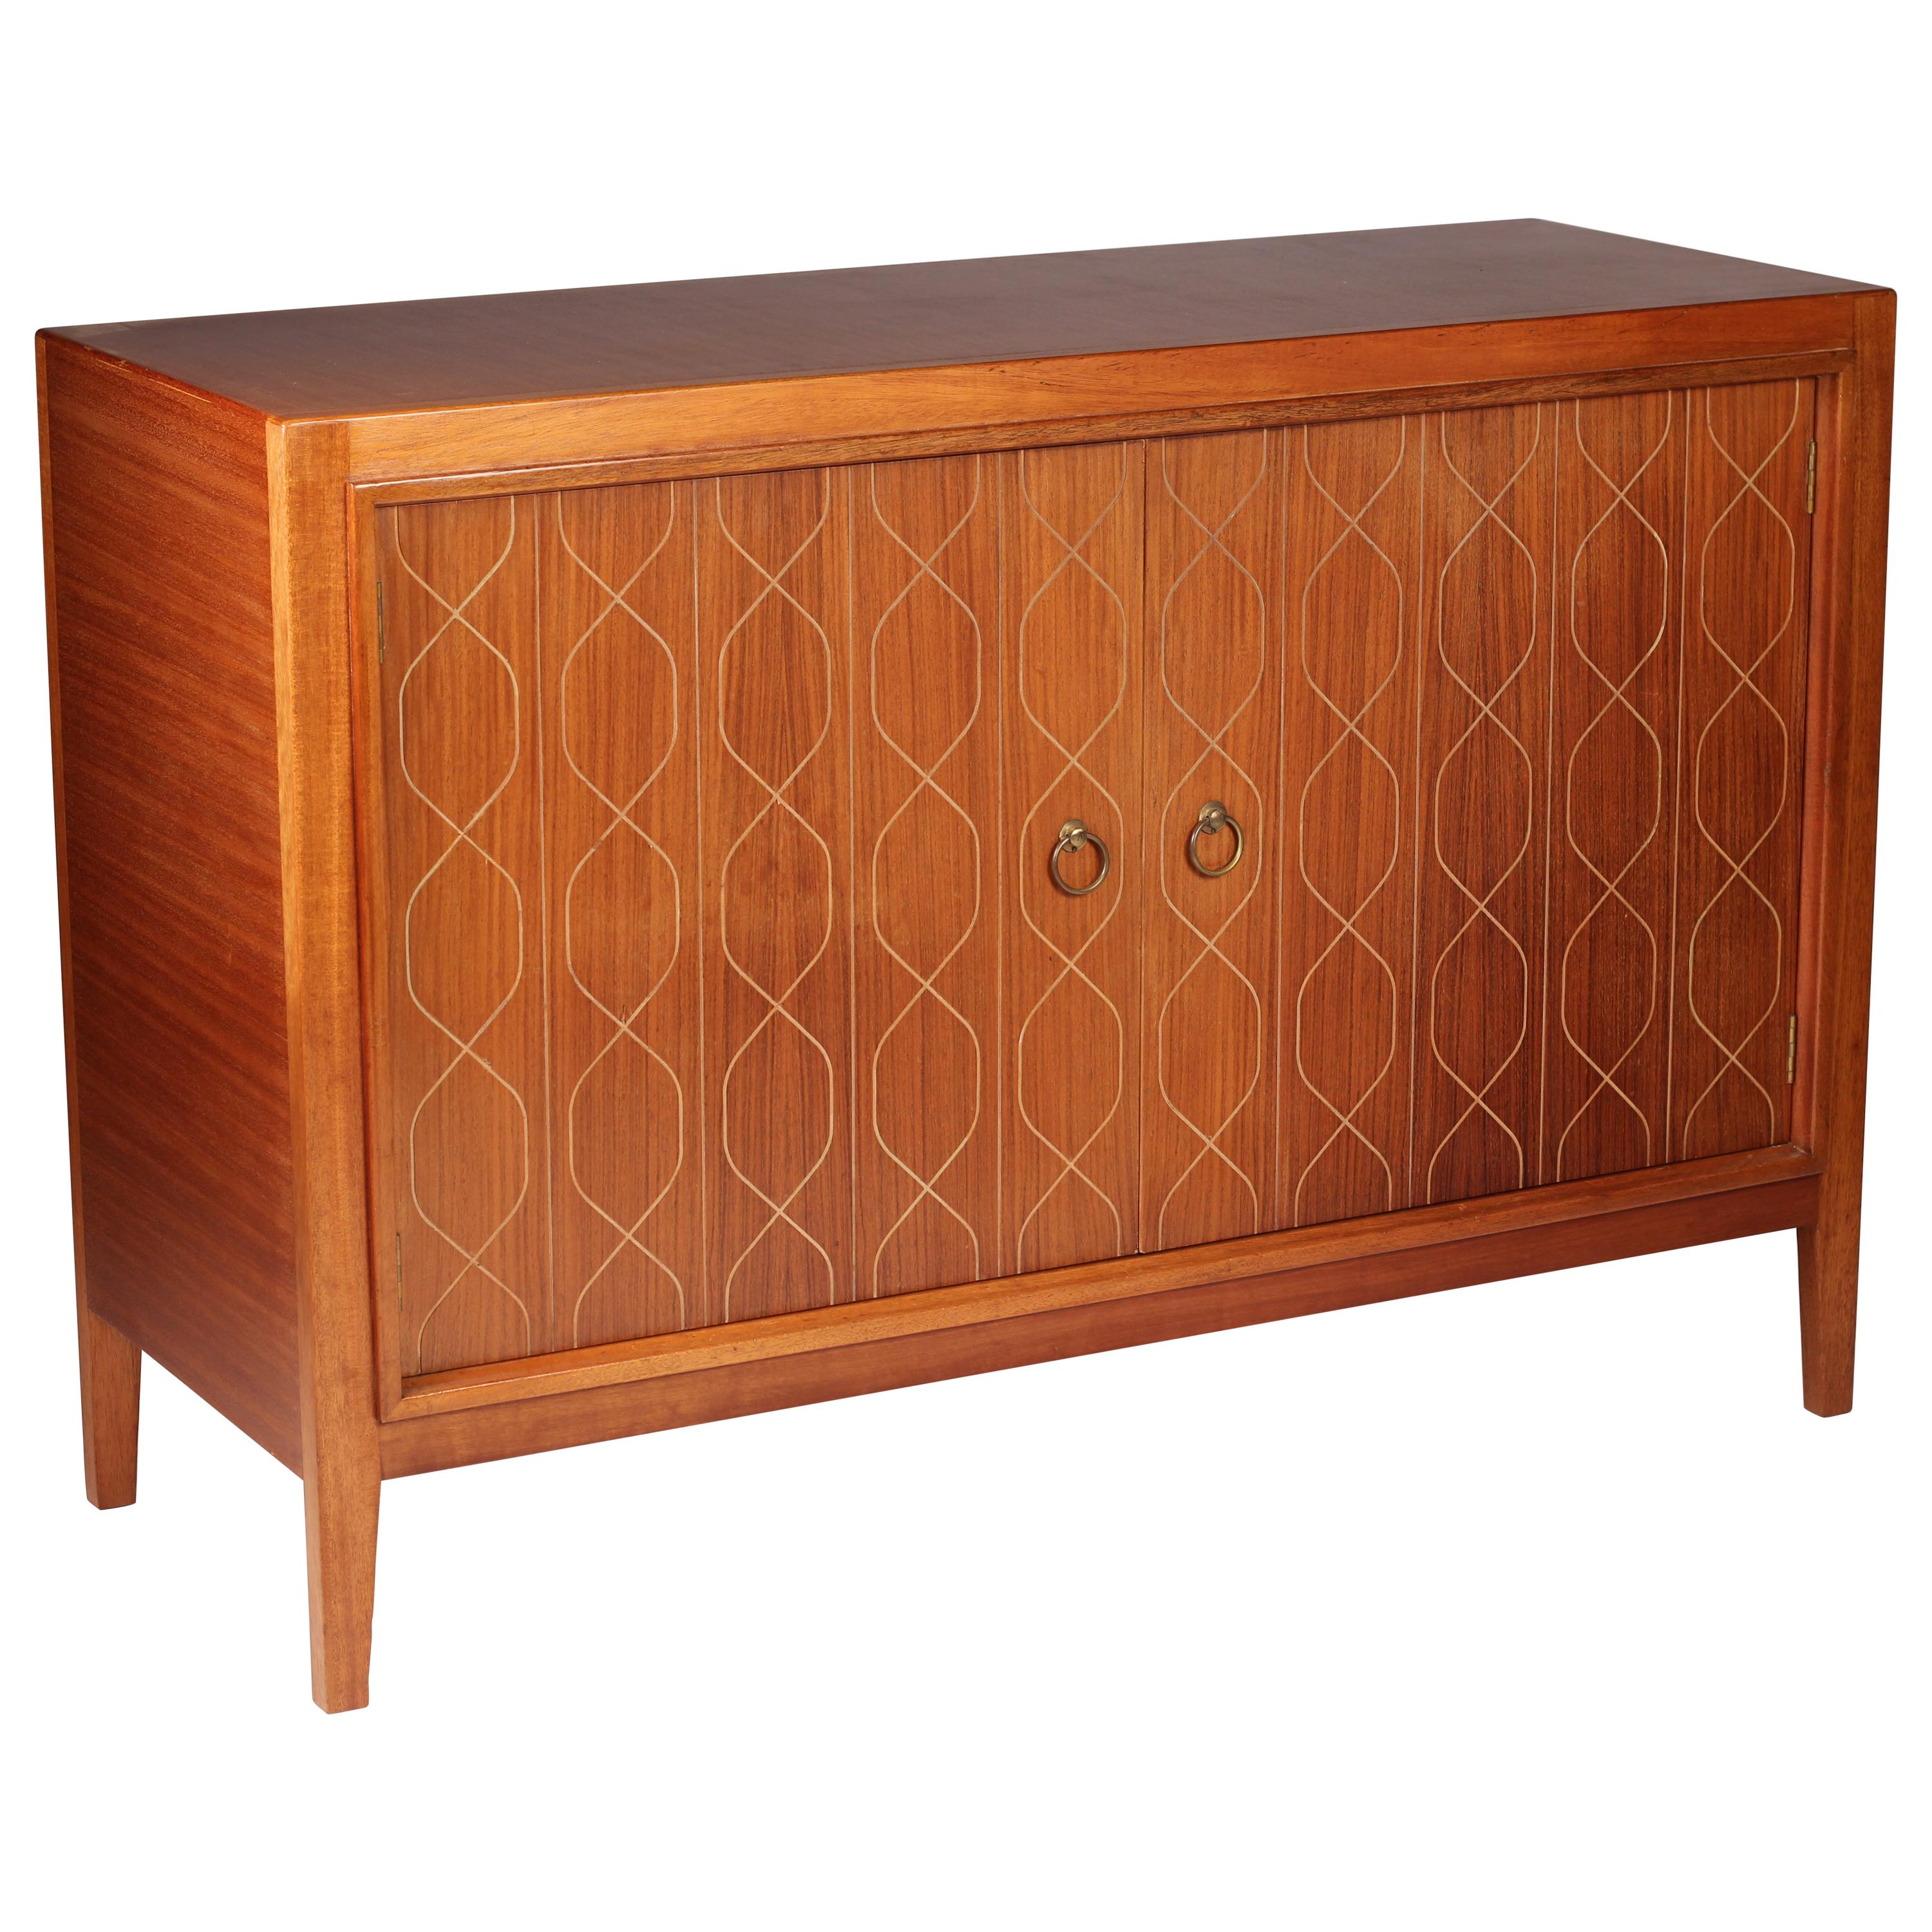 Mid-Century Modern British Double Helix Sideboard by Gordon Russell